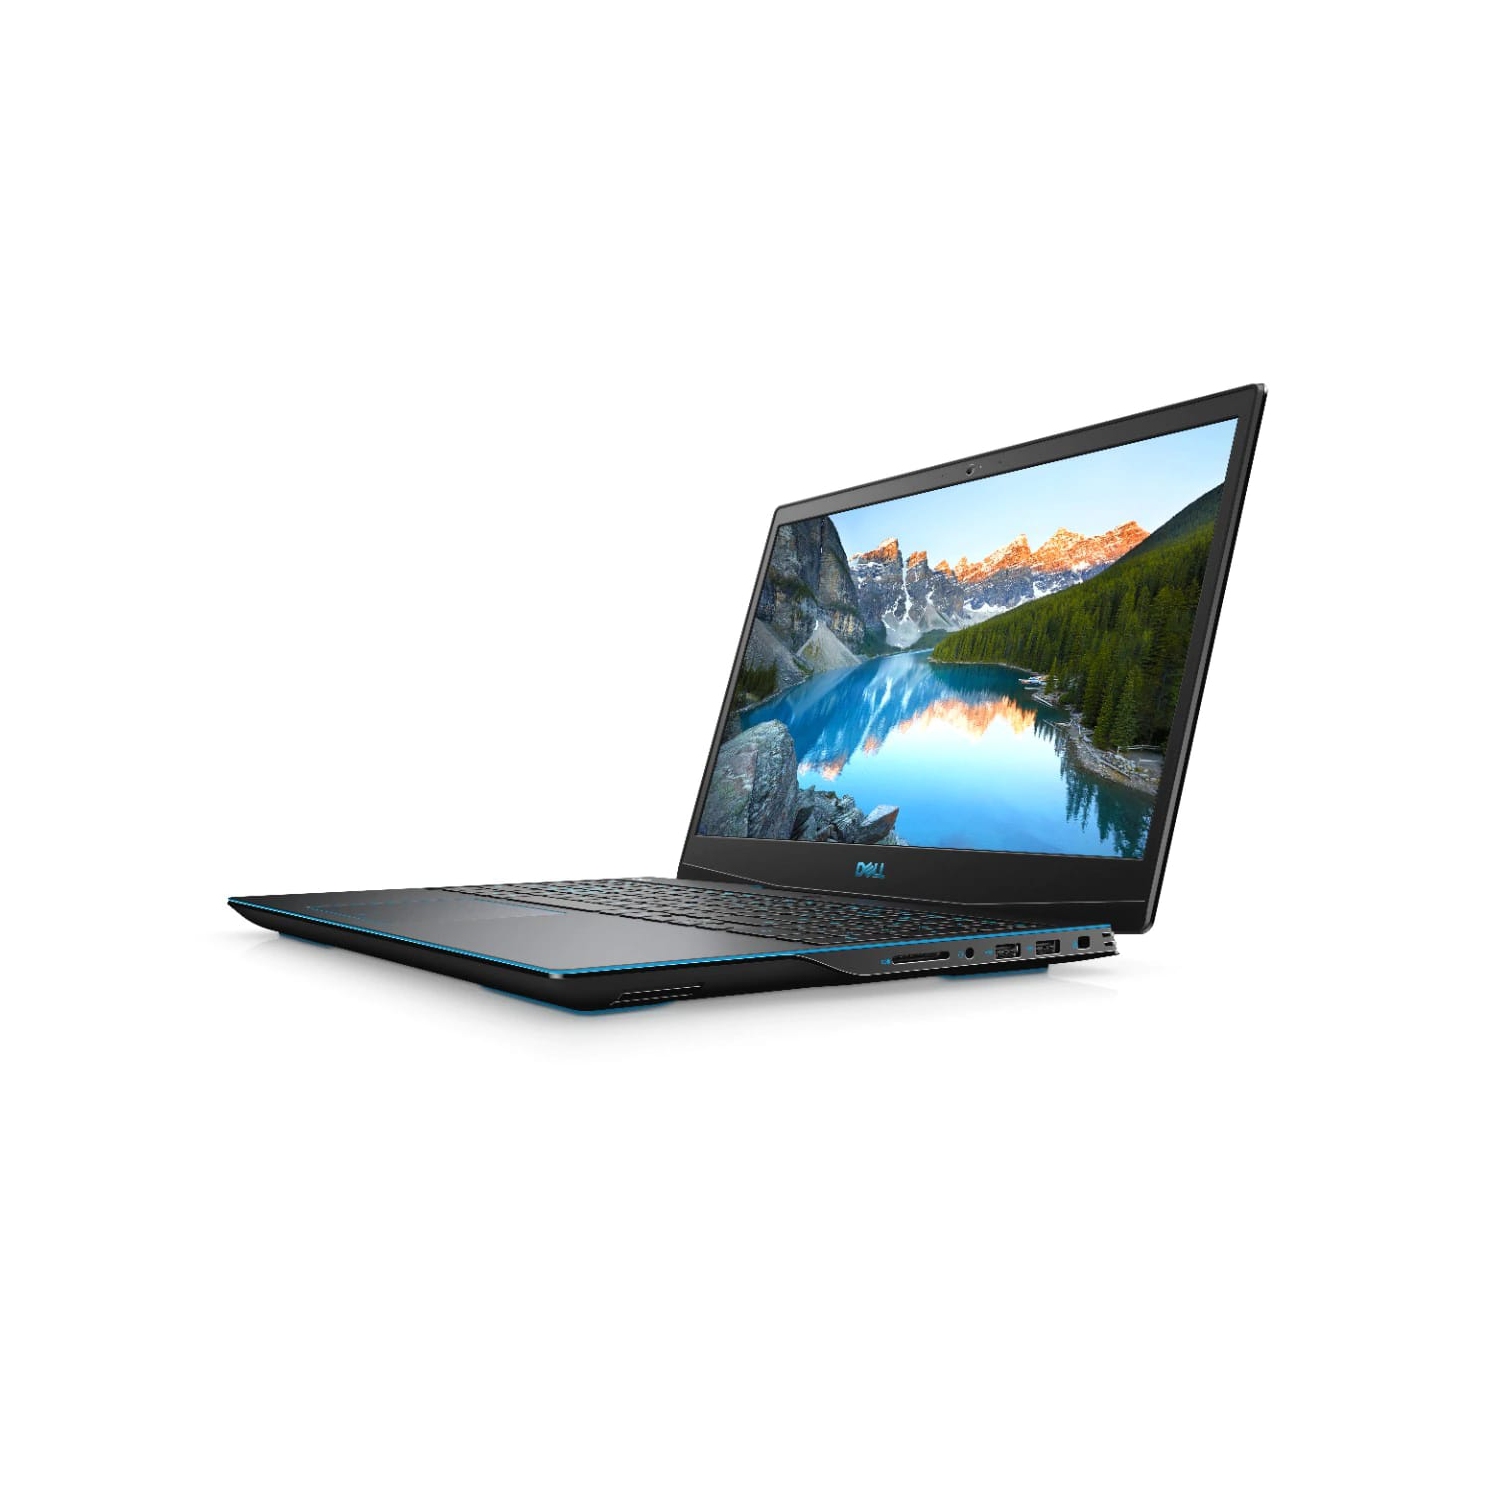 Refurbished (Excellent) – Dell G3 3500 Gaming Laptop (2020) | 15.6" FHD | Core i5 - 1TB SSD - 16GB RAM - 1650 Ti | 4 Cores @ 4.5 GHz - 10th Gen CPU